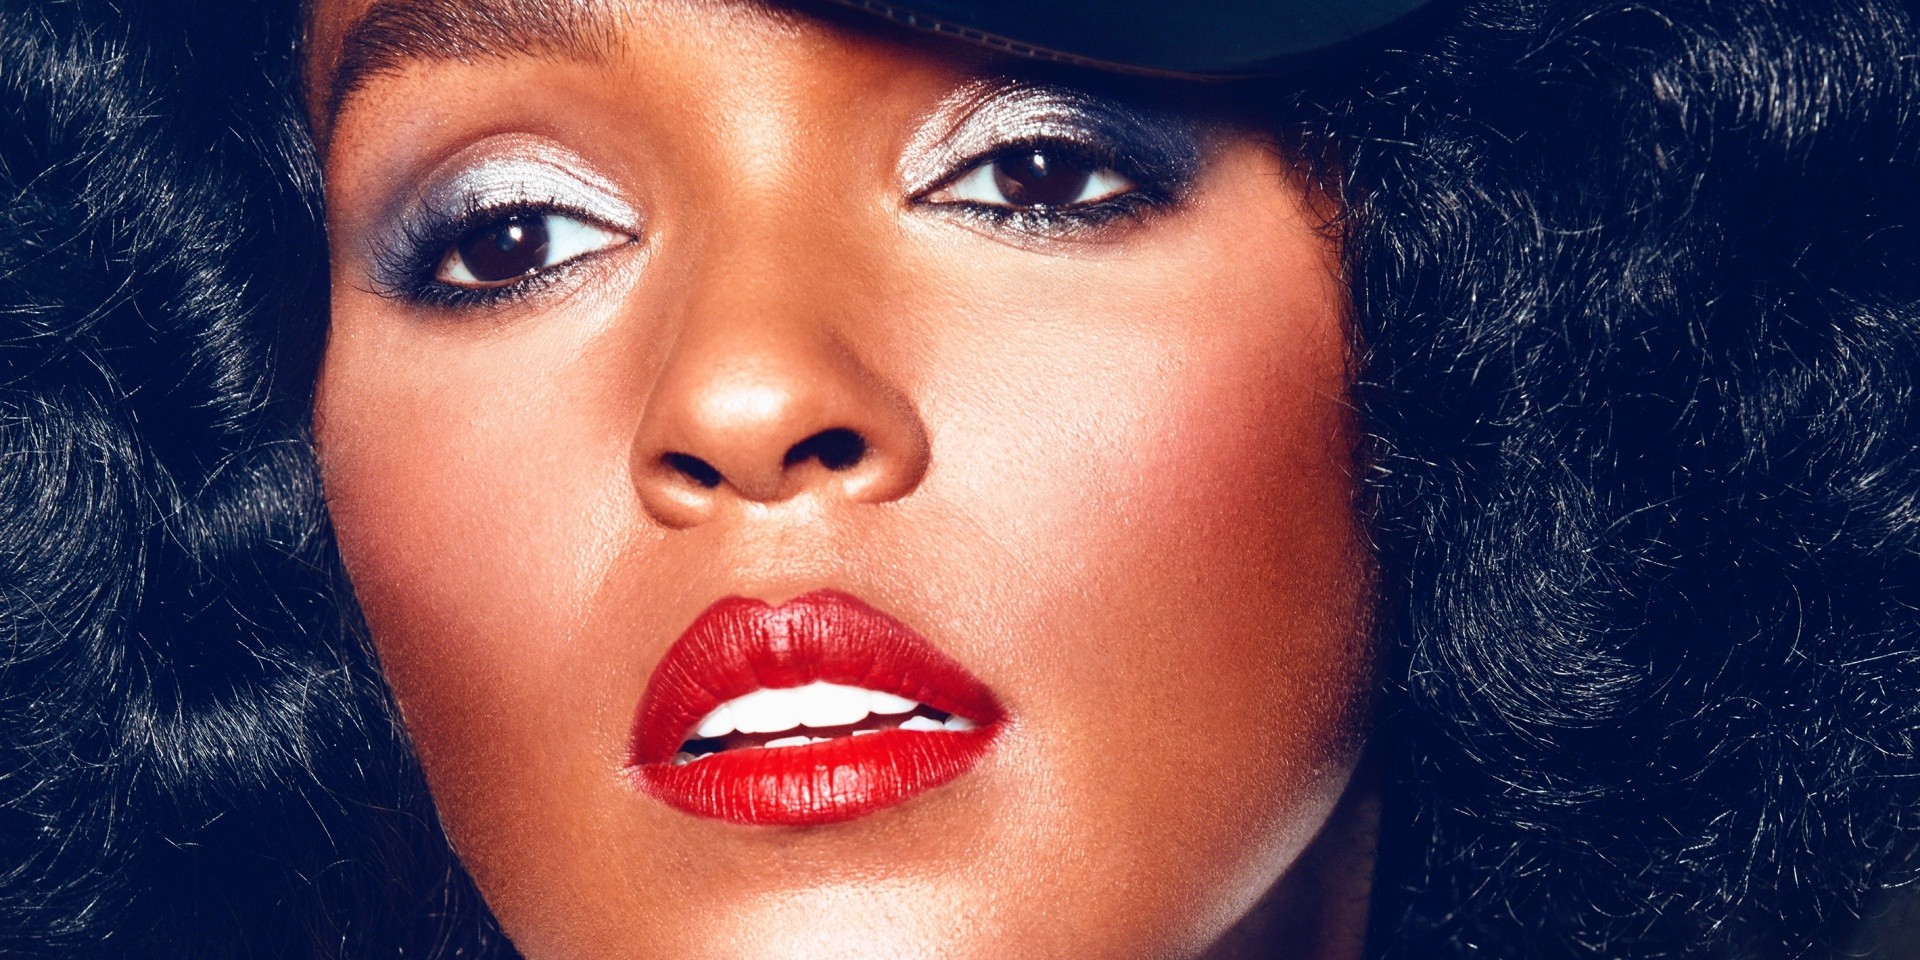 Janelle Monae's Wondaland Pictures secures a first-look production deal with Universal